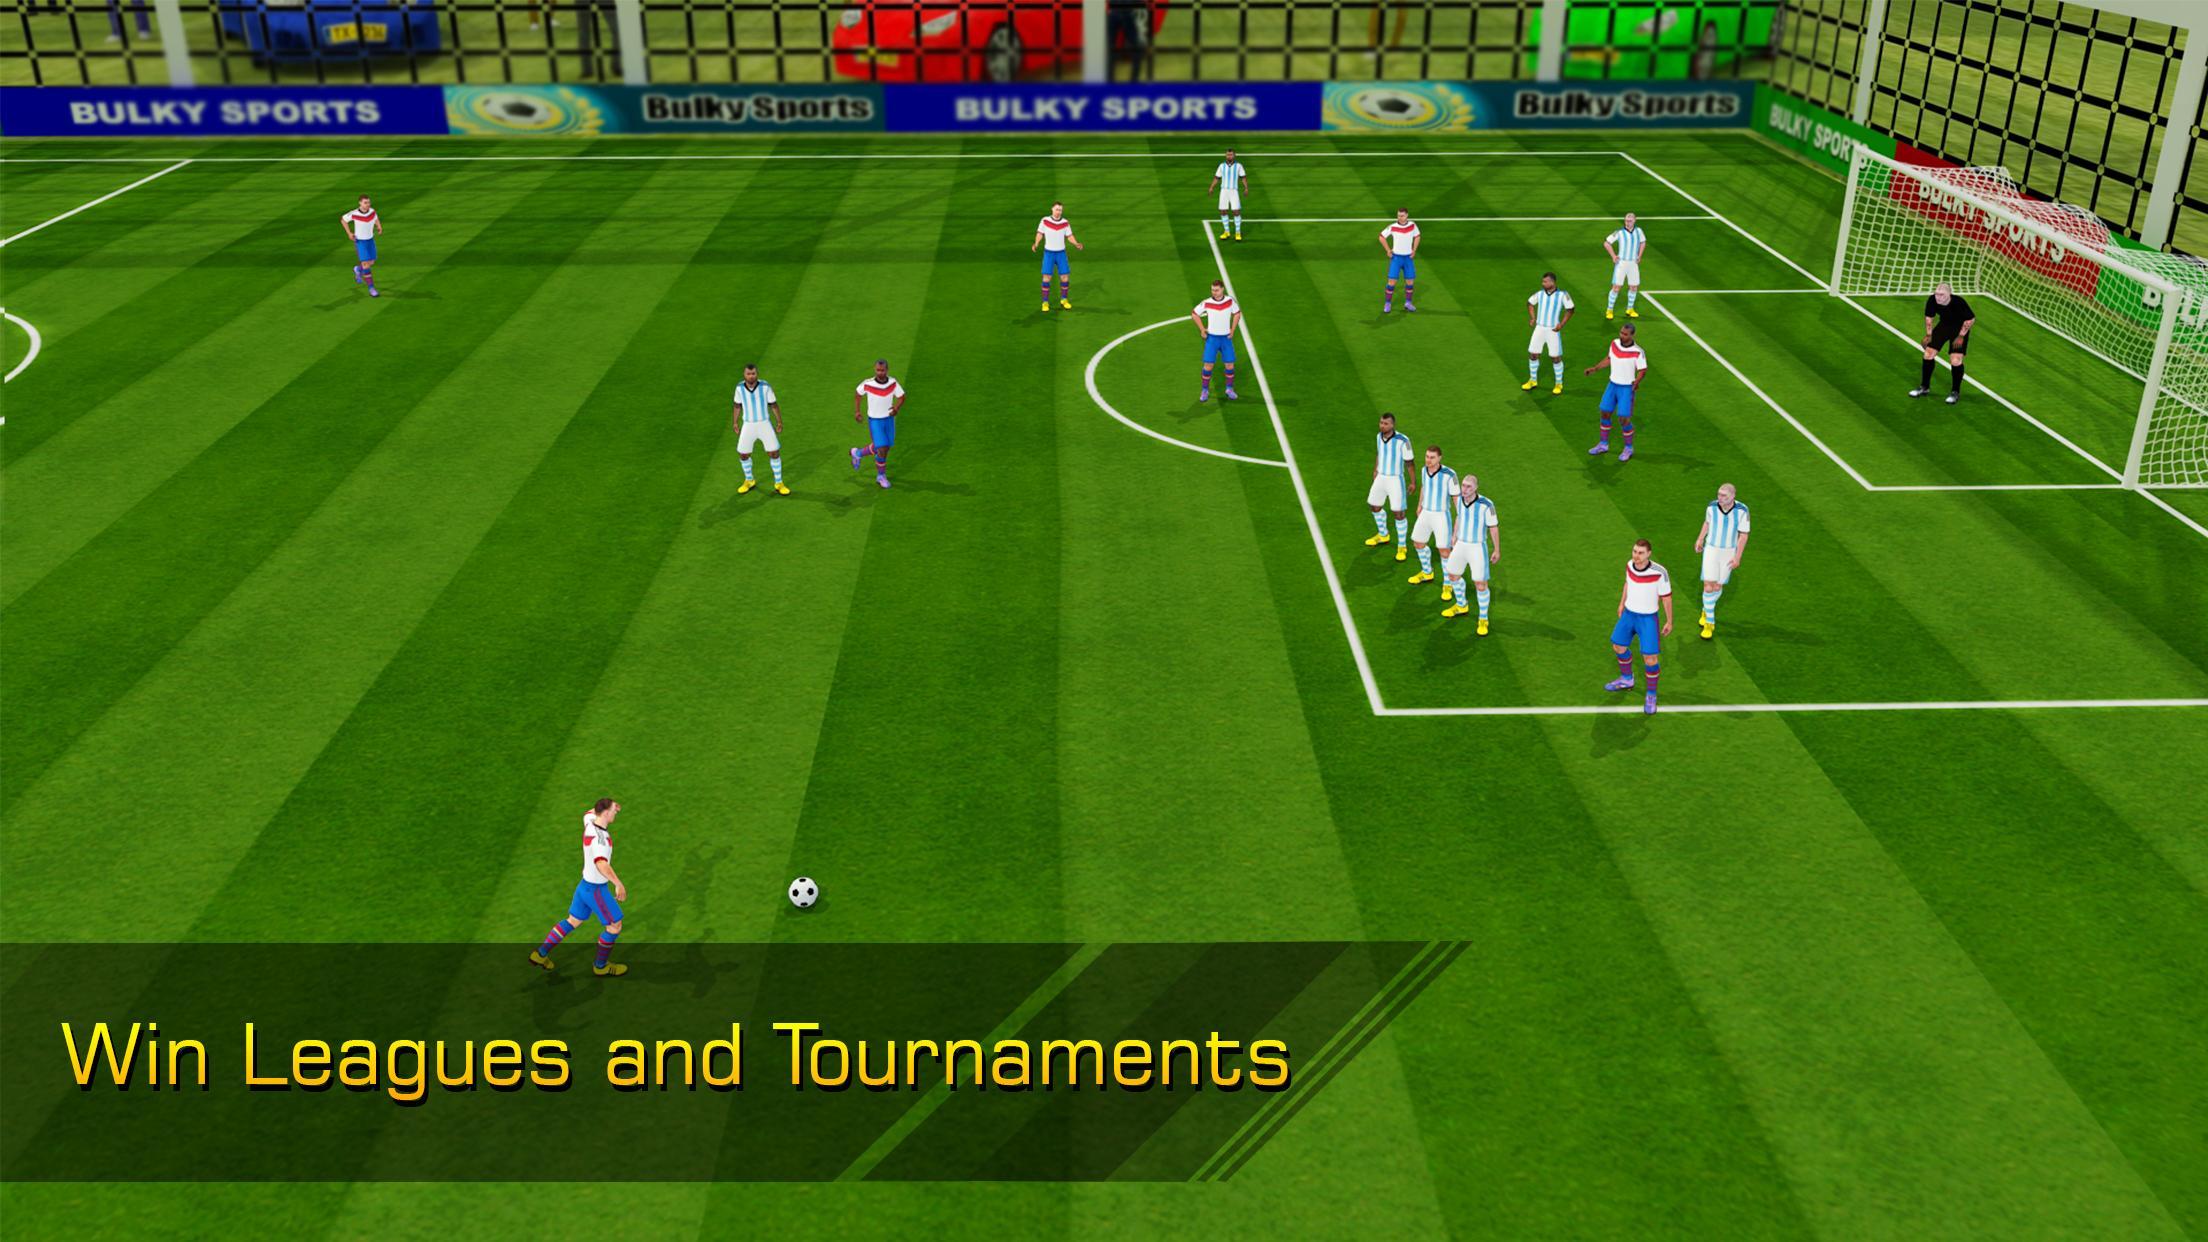 Soccer Champions for Android - APK Download